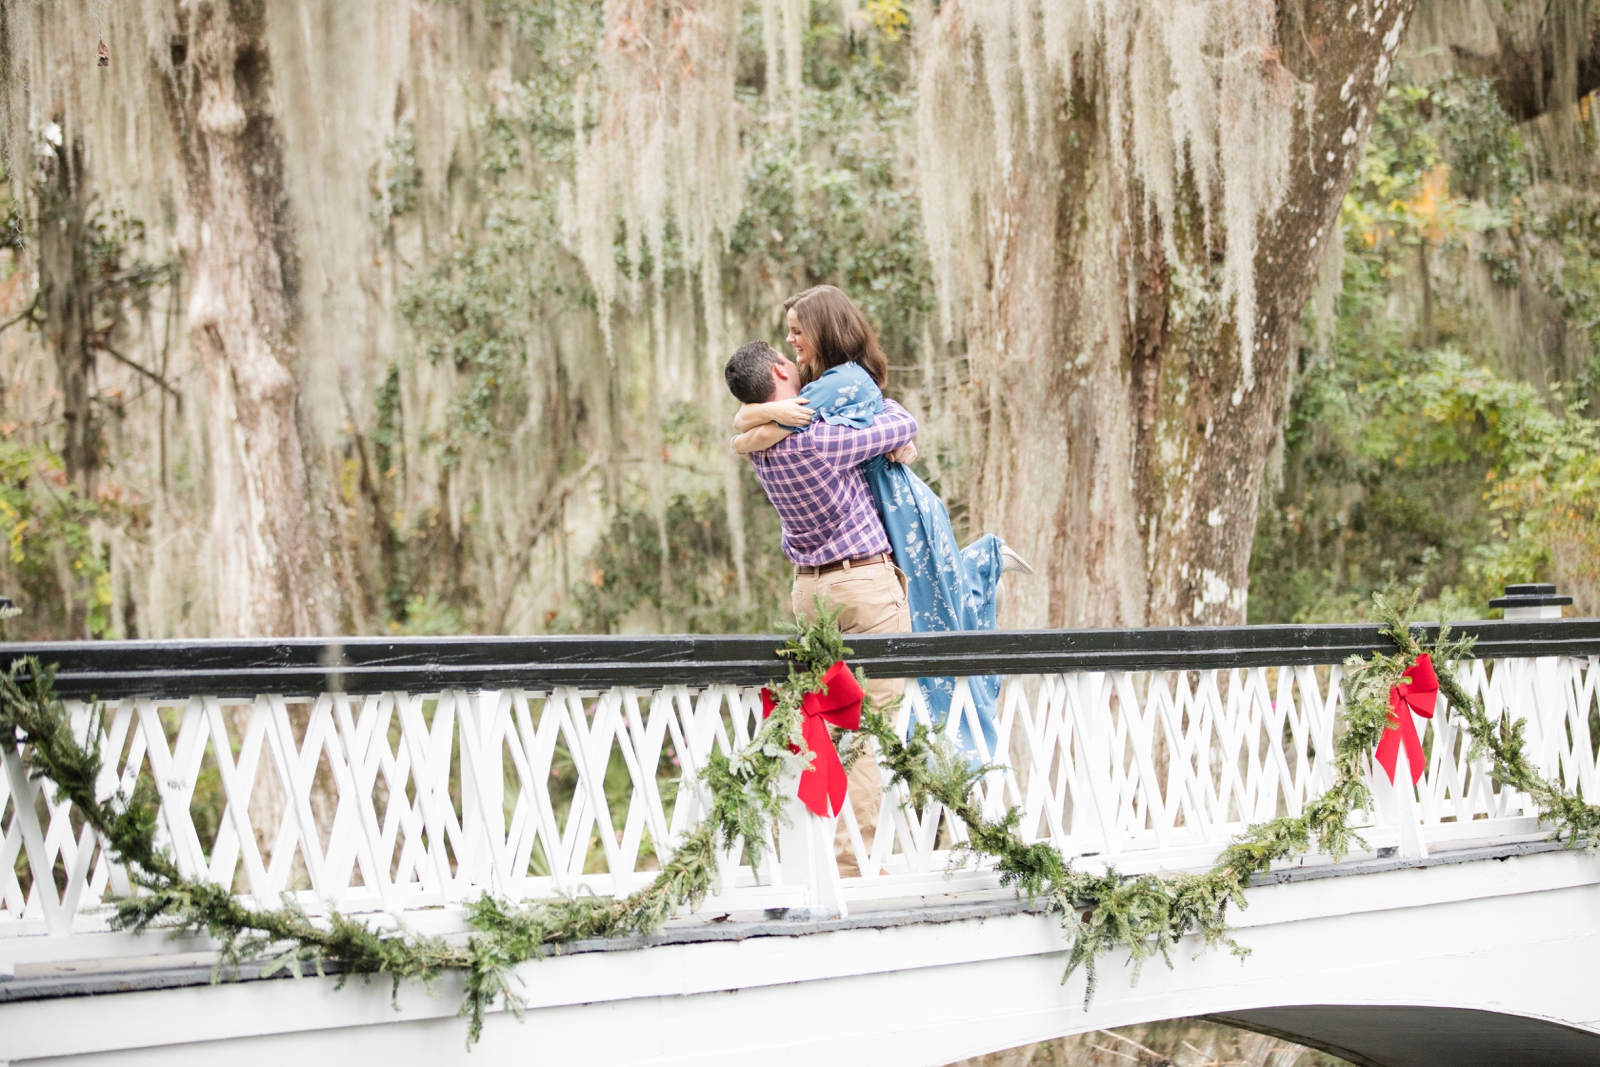 Our Proposal - Sydney Bruton Photography